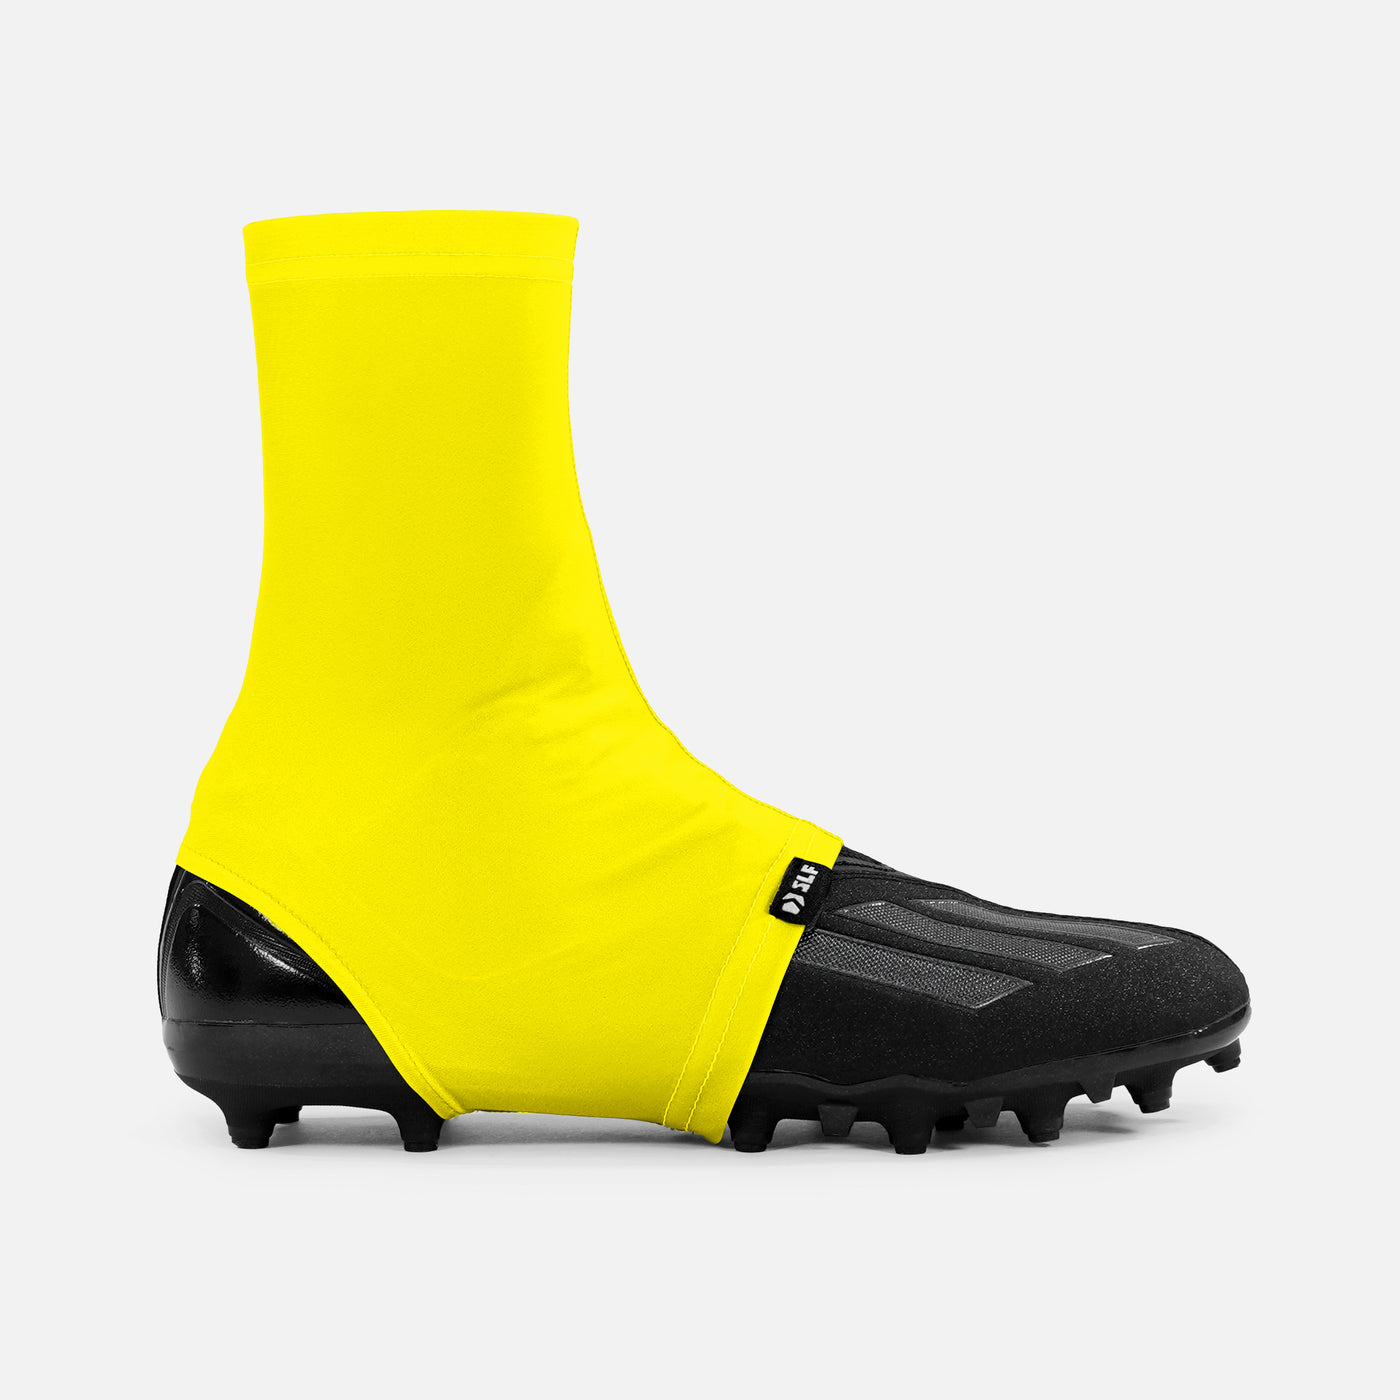 Hue Yellow Spats / Cleat Covers